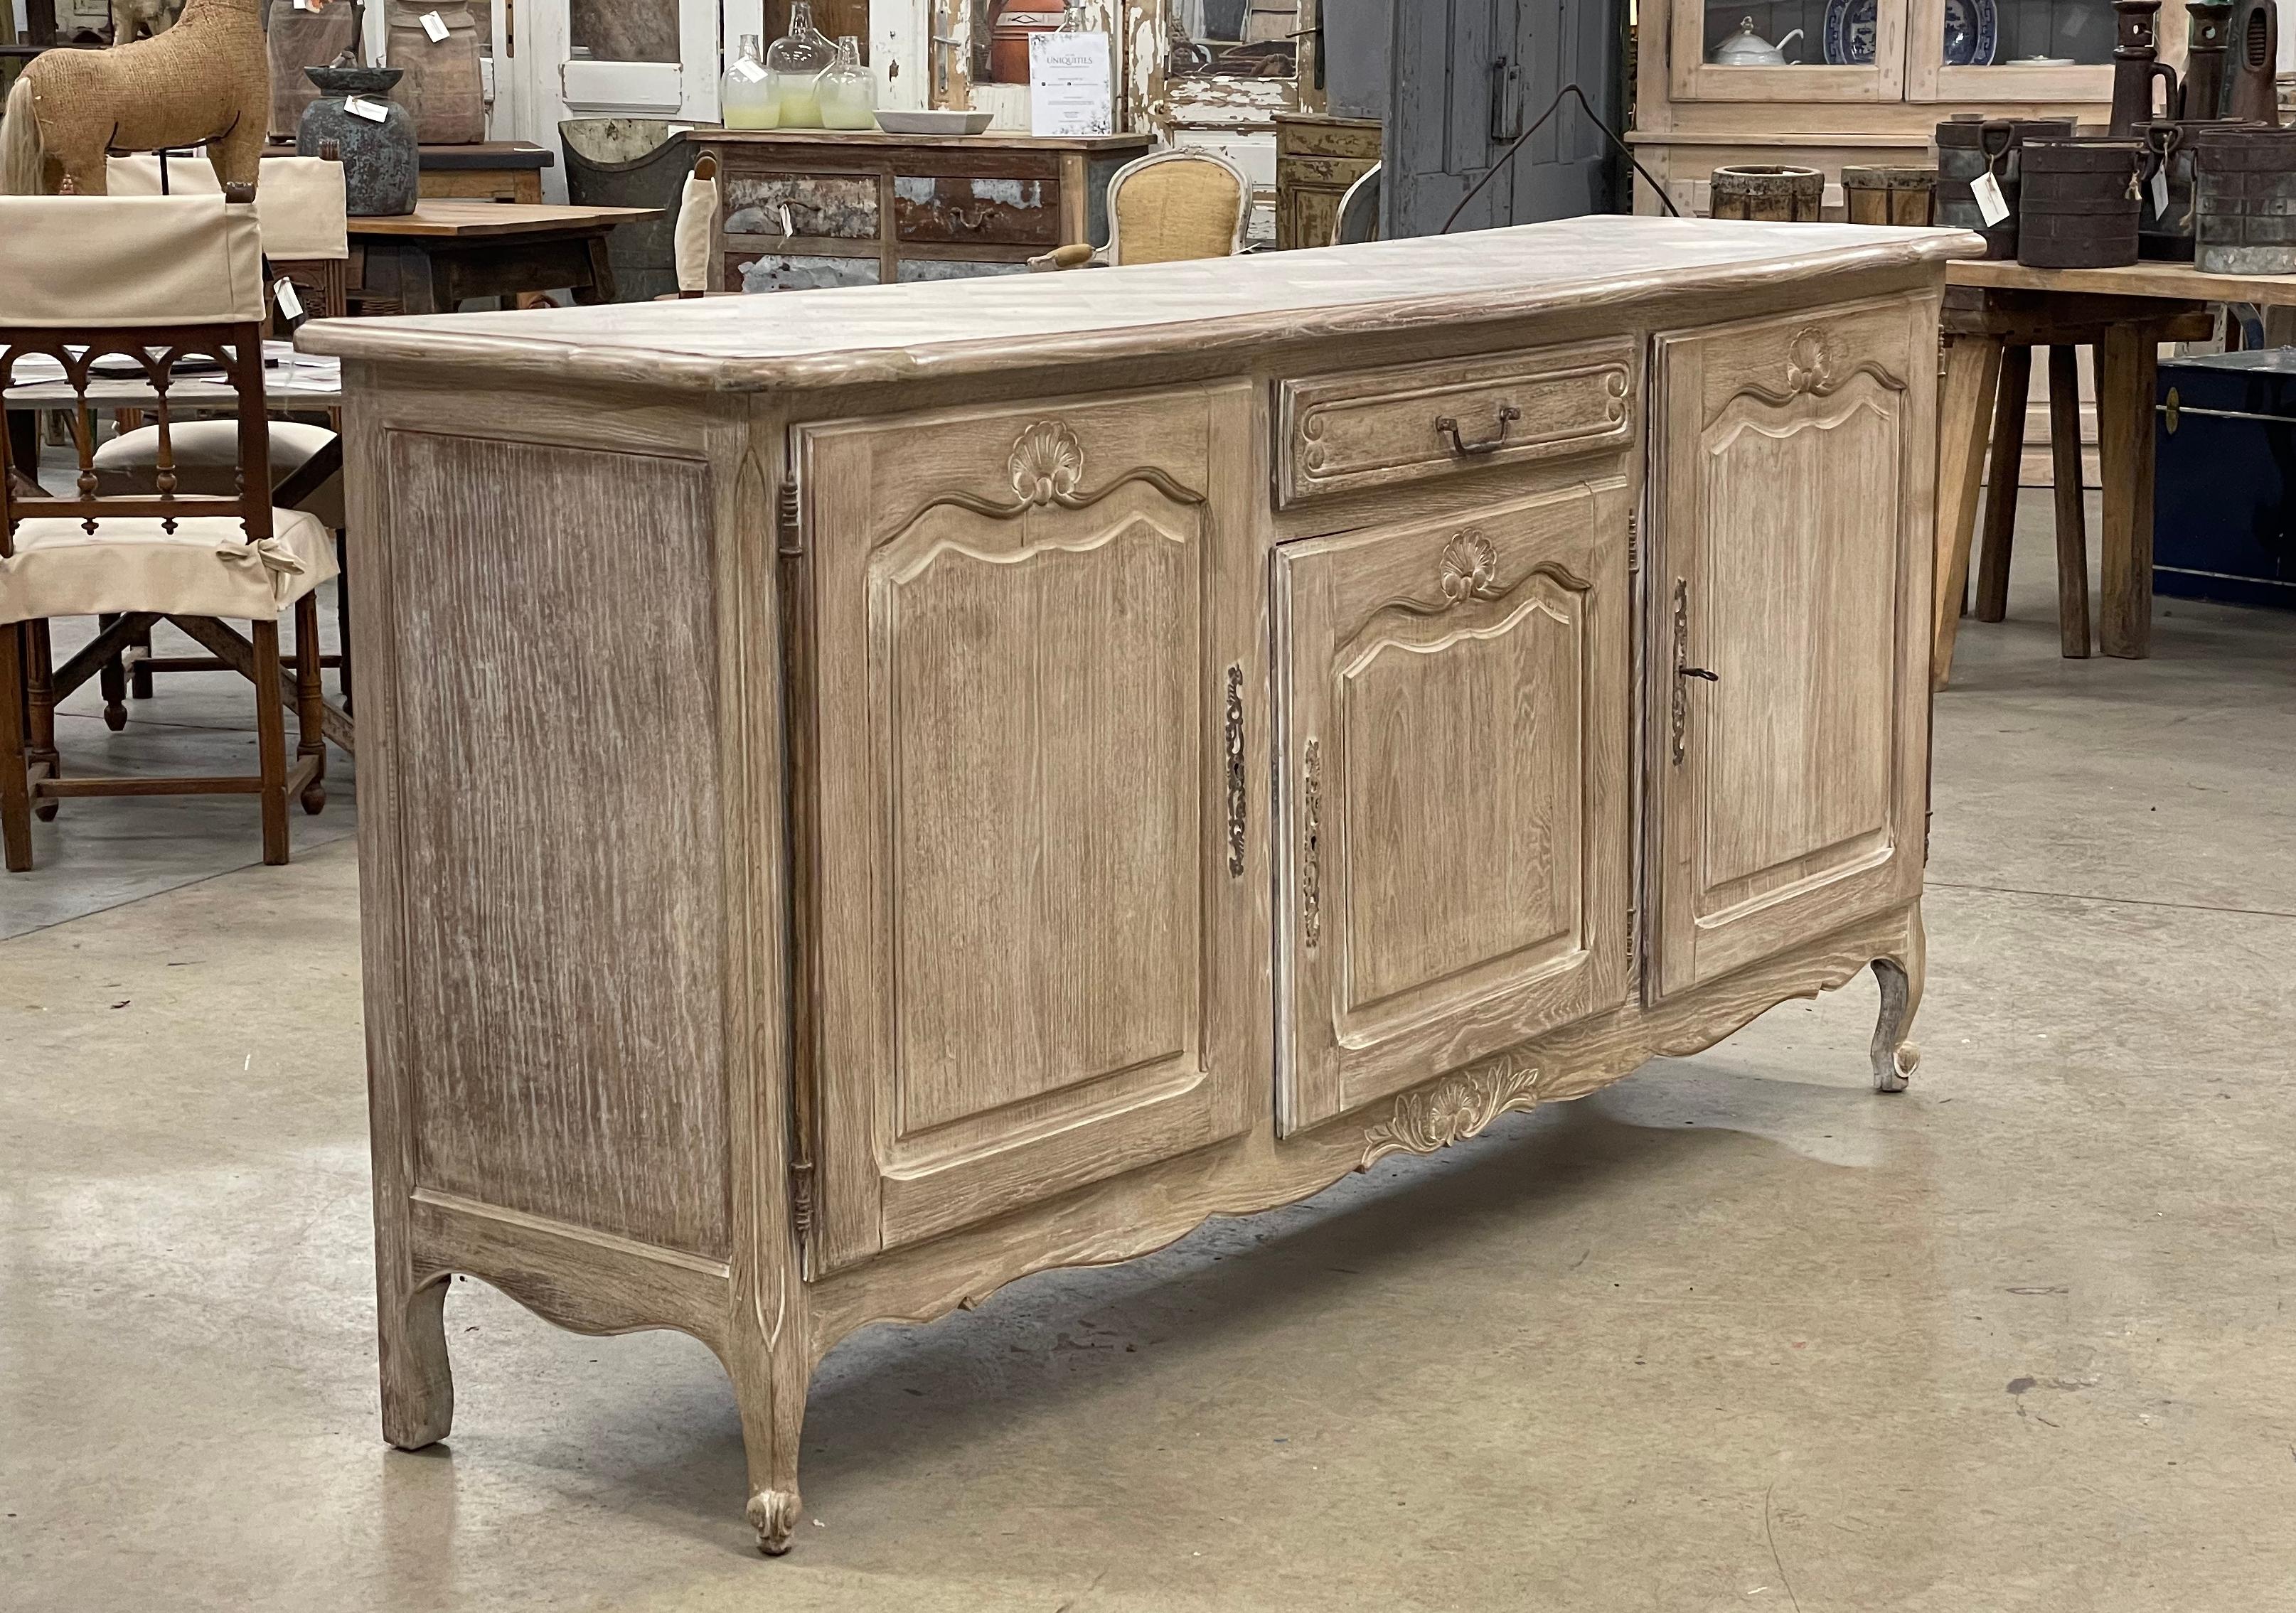 Substantial antique bleached and limed oak breakfront Louis XVI style enfilade with 3 raised panel doors and 1 drawer. Exceptional quality with parquetry top, beautiful hand wrought iron escutcheons, snail feet, and scalloped bottom apron.